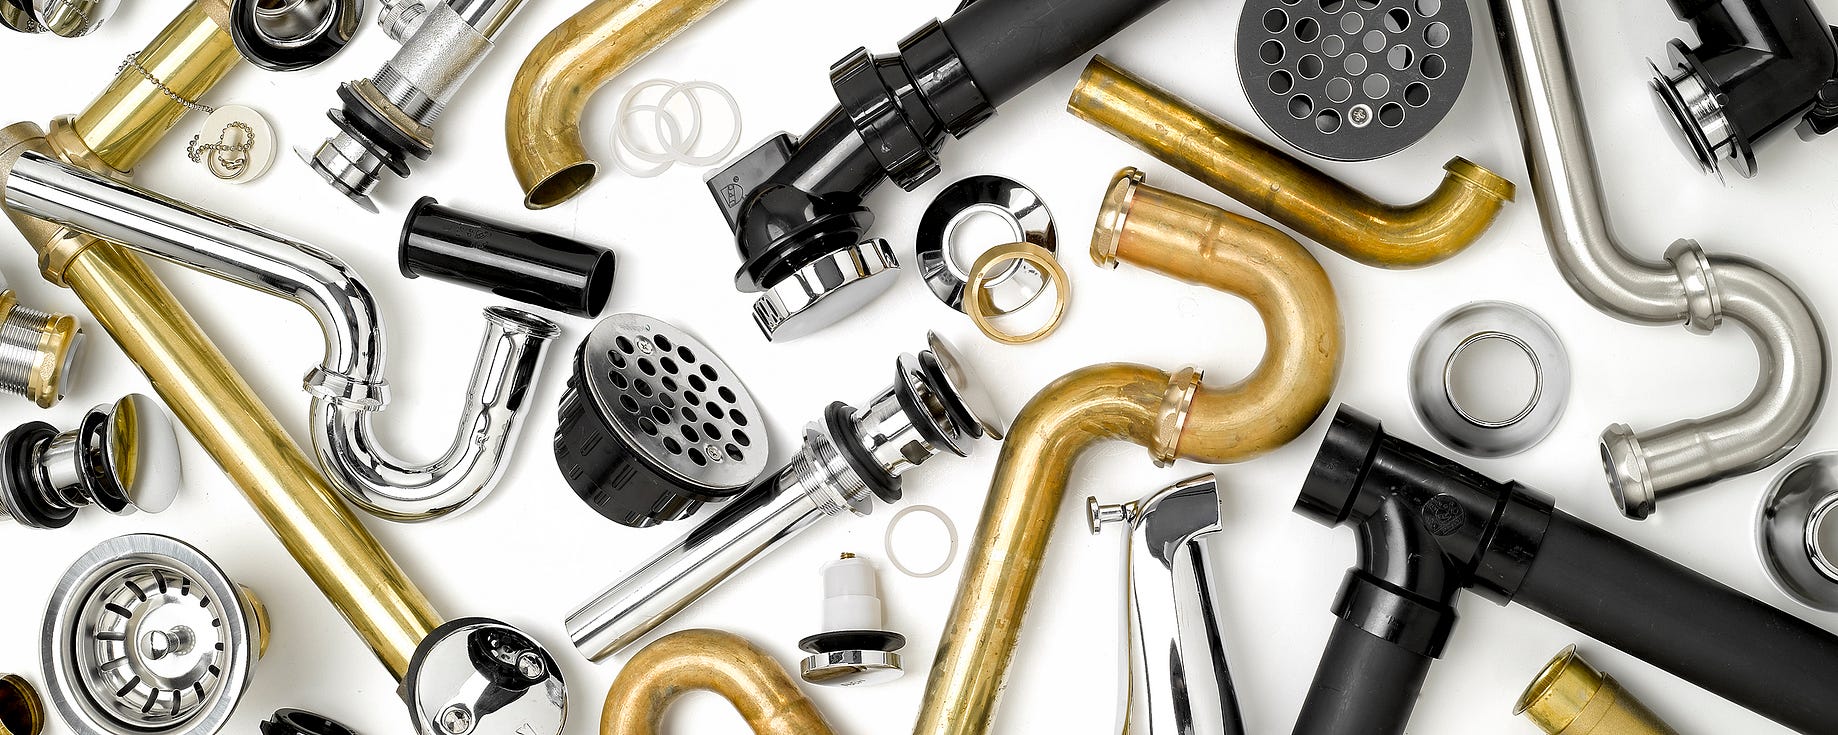 5 Reasons to Call a Drain Plumbing Specialist